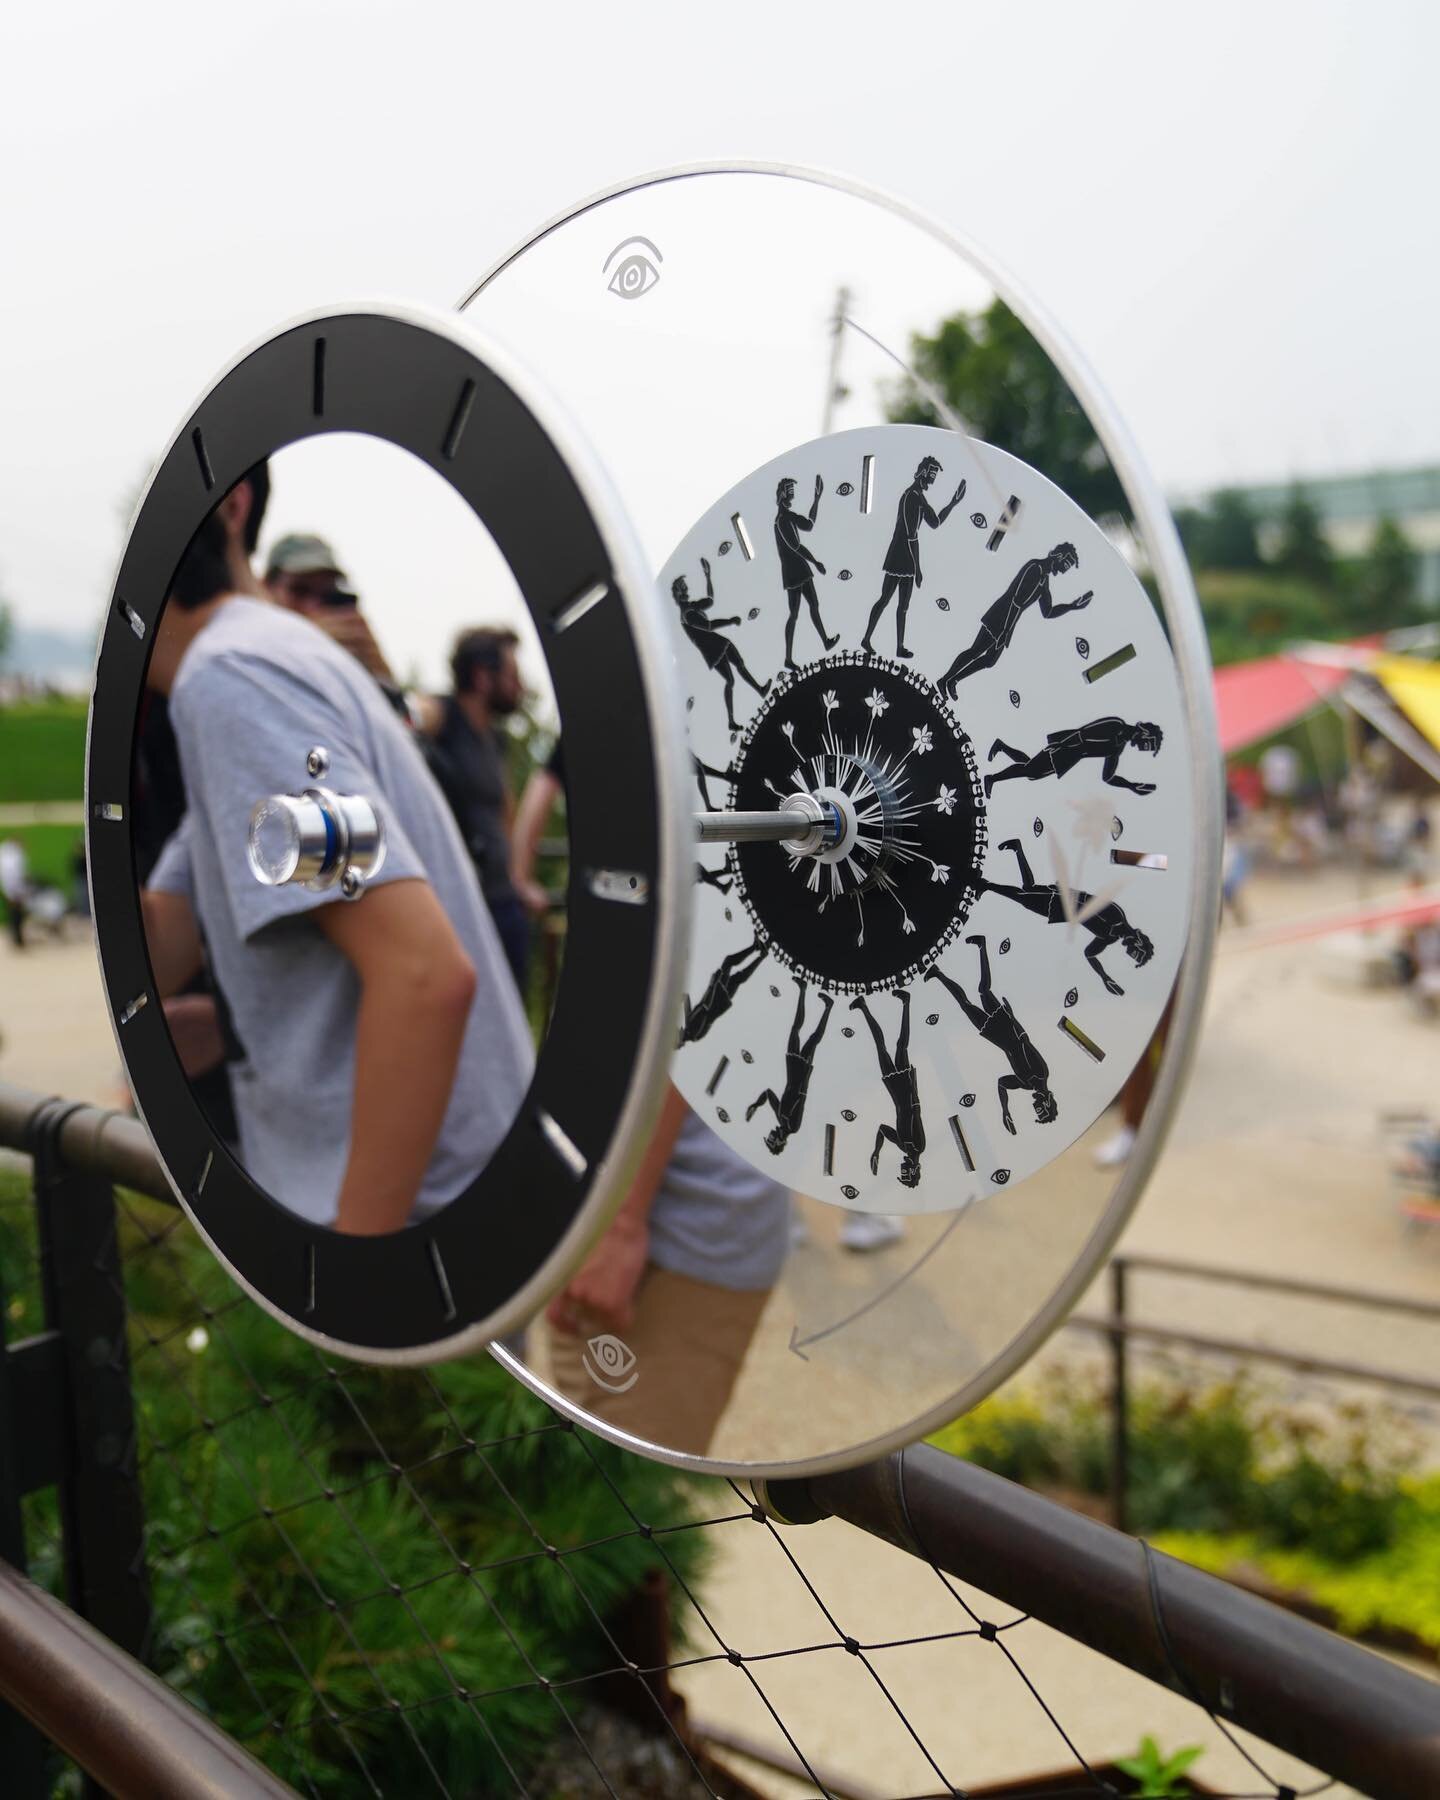 Ever heard of a phenakistoscope? We created 3 of these early animation devices for an art installation at the new Little Island on Pier 55 in NYC.
.
.
.
.
.
#standardtransmission #creativetechnology #fabrication #design #innovation #experiential